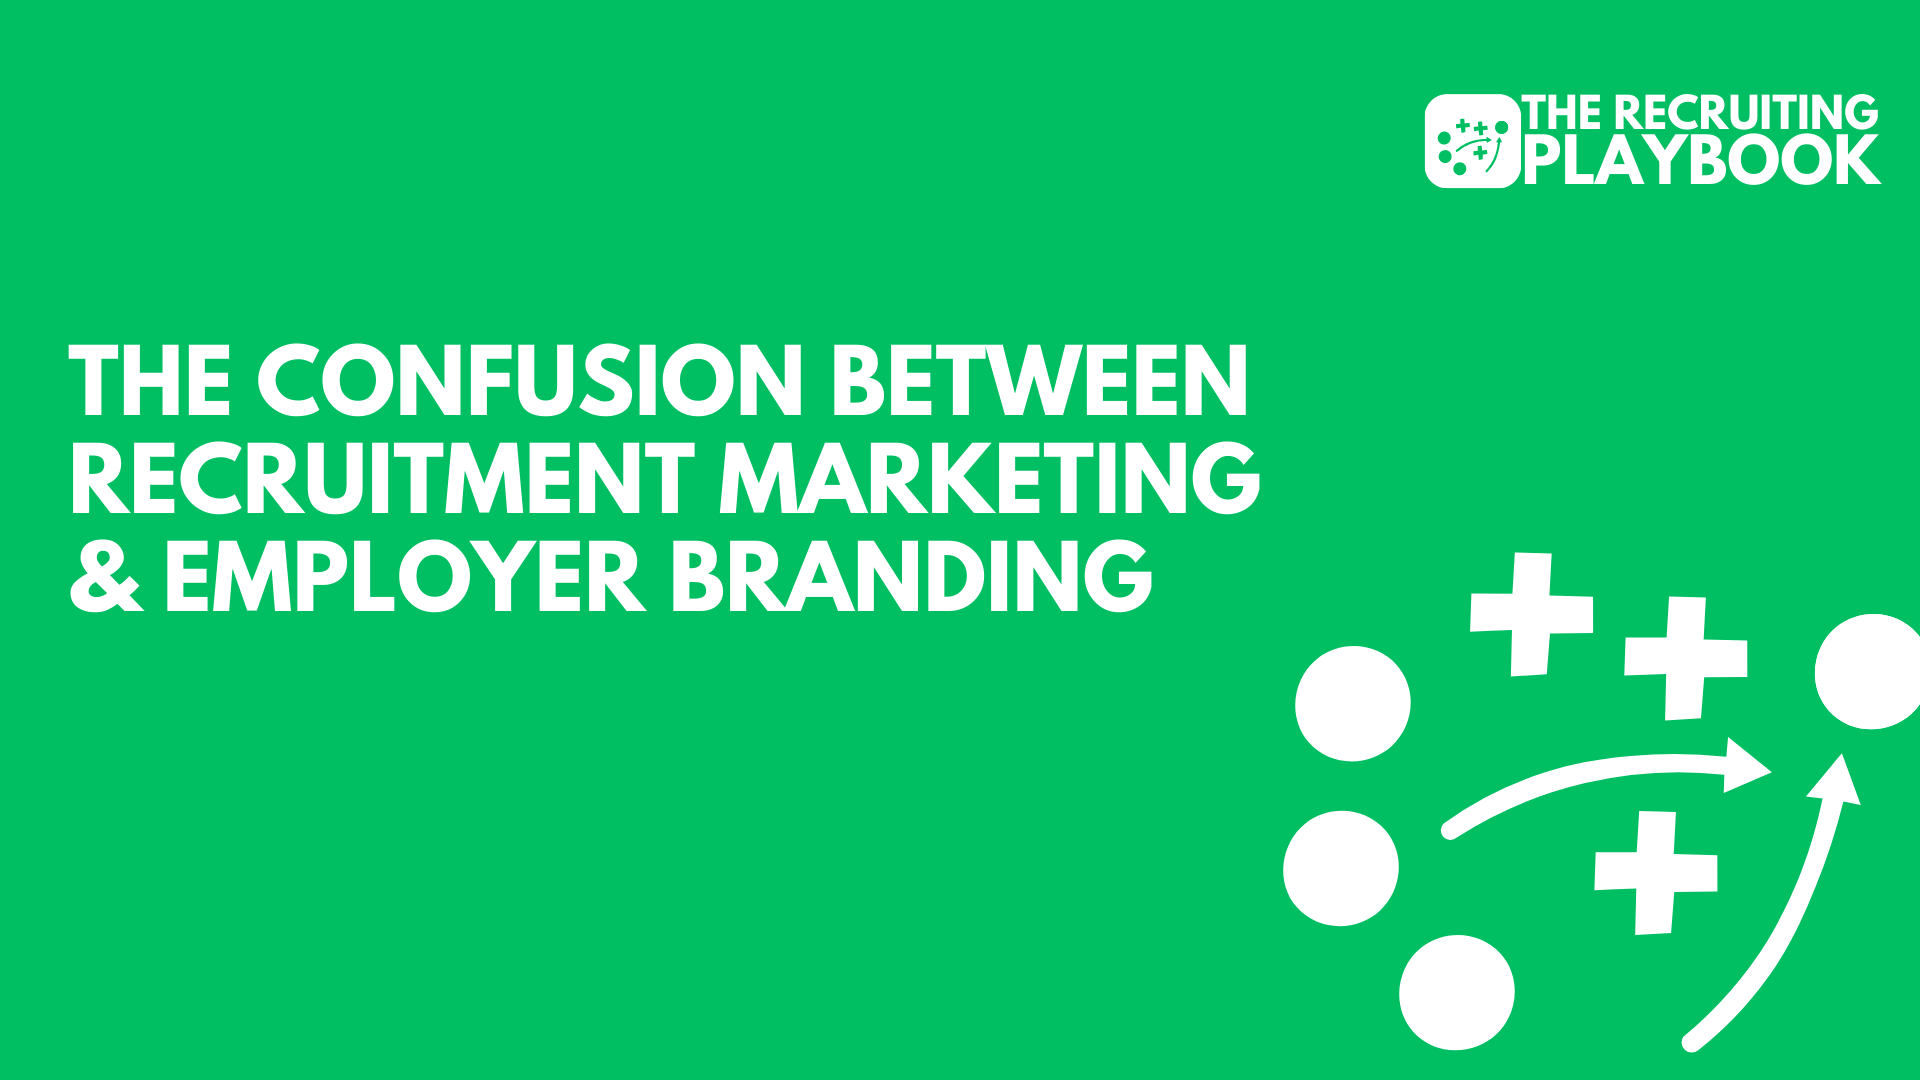 The Confusion between Recruitment Marketing & Employer Branding